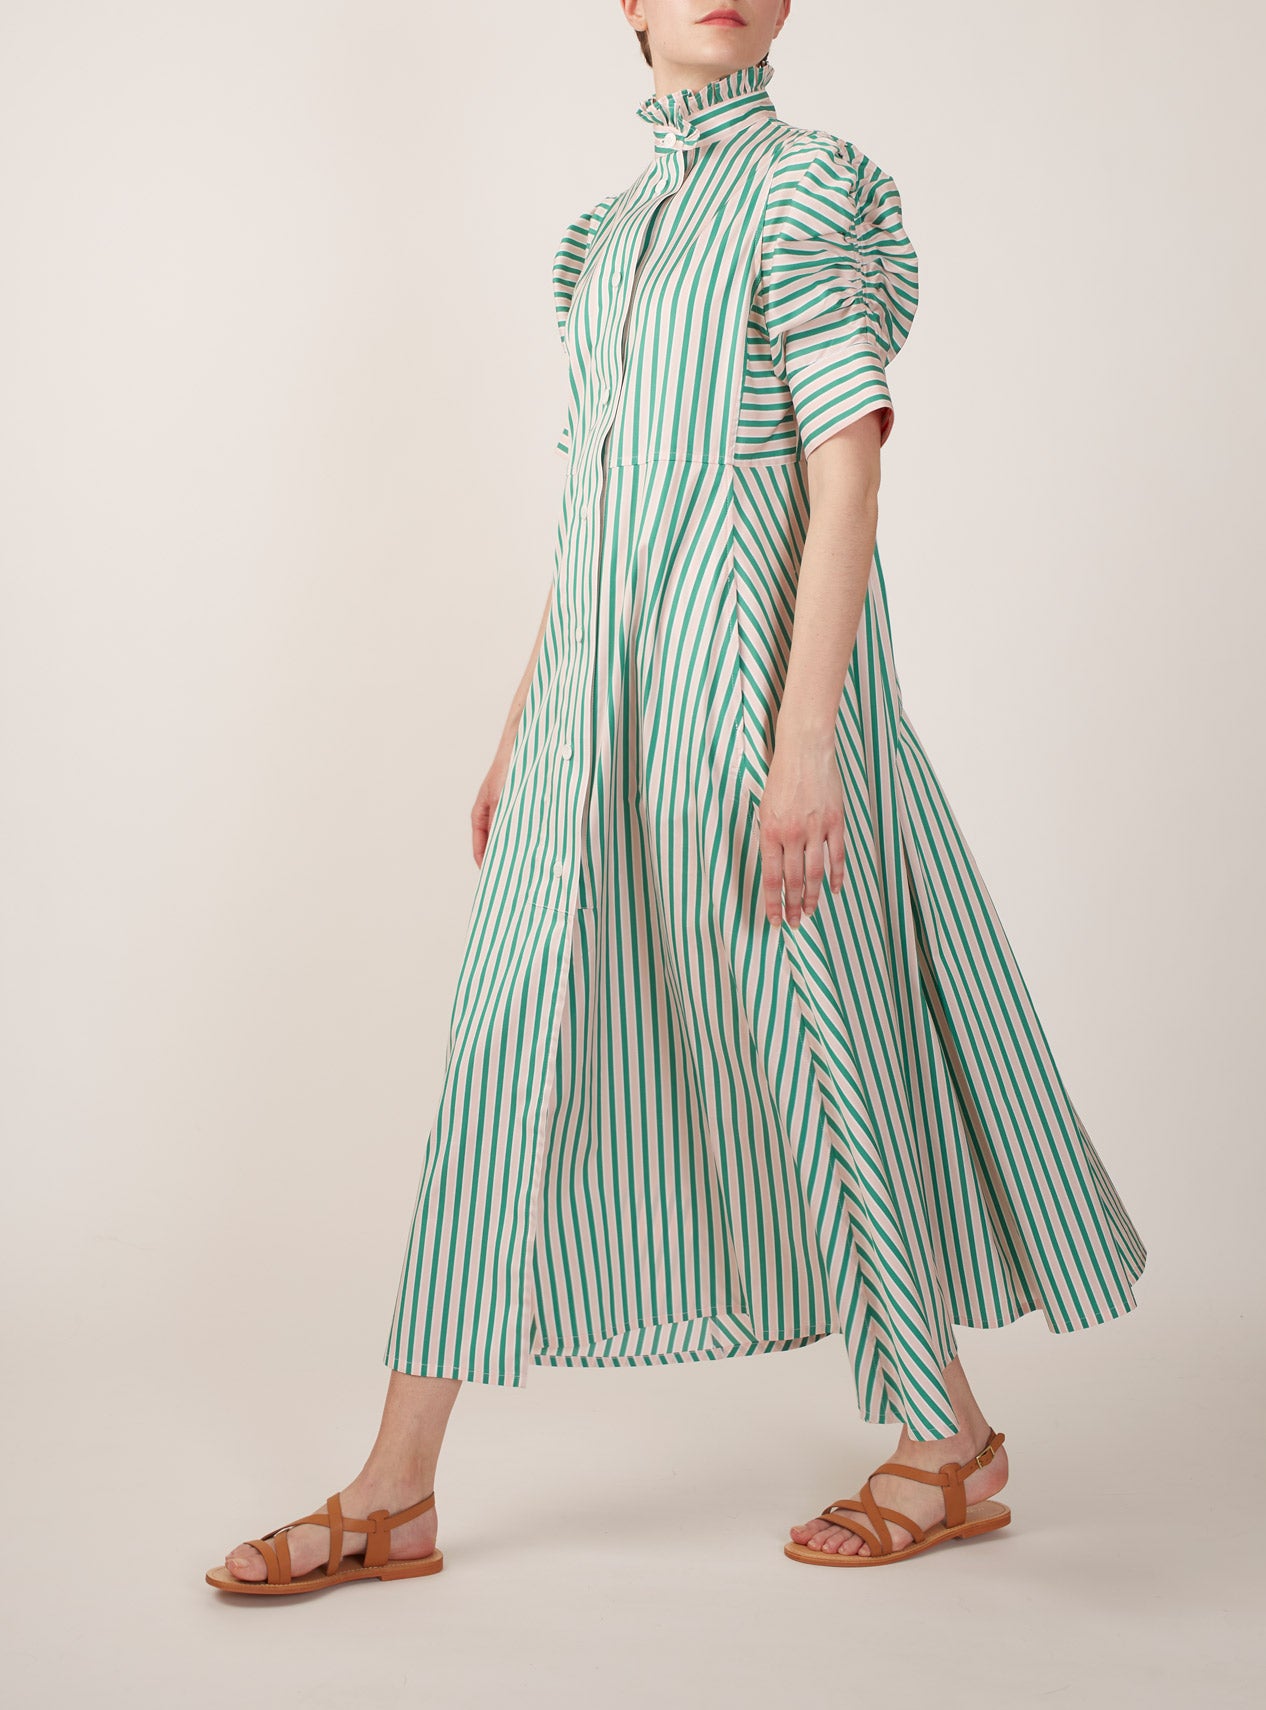 Venetia Mayfair Green/Salmon/White Dress by Thierry Colson, the perfect dress for summer